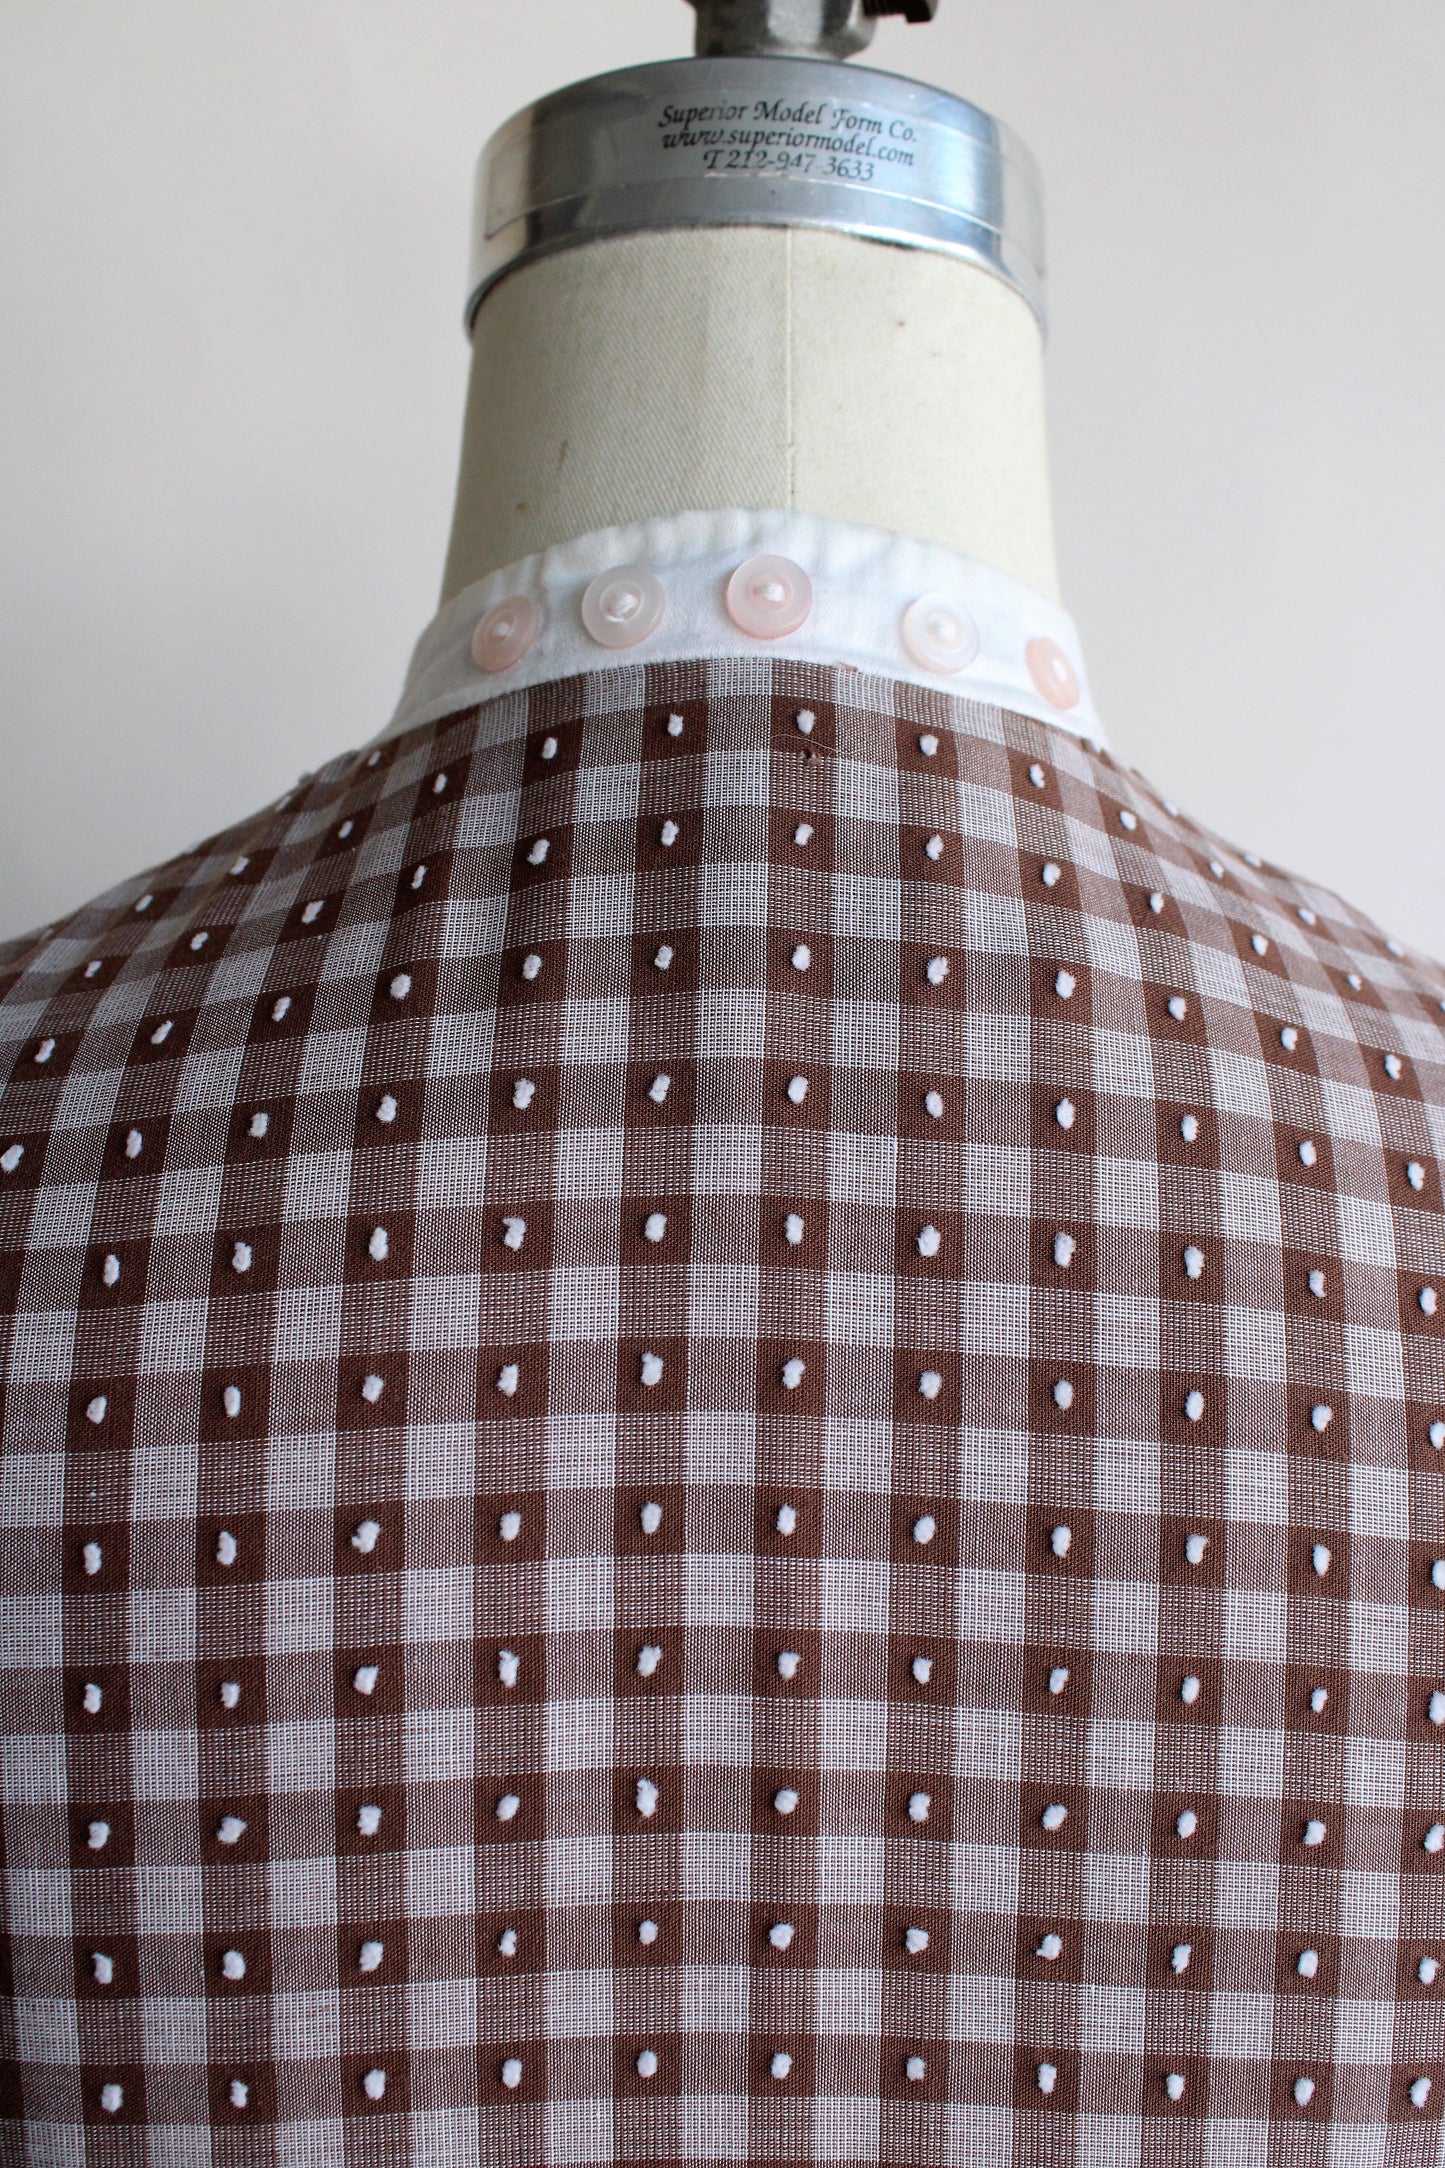 Vintage 1950s Brown Check Fit and Flare Dress by Dress Town